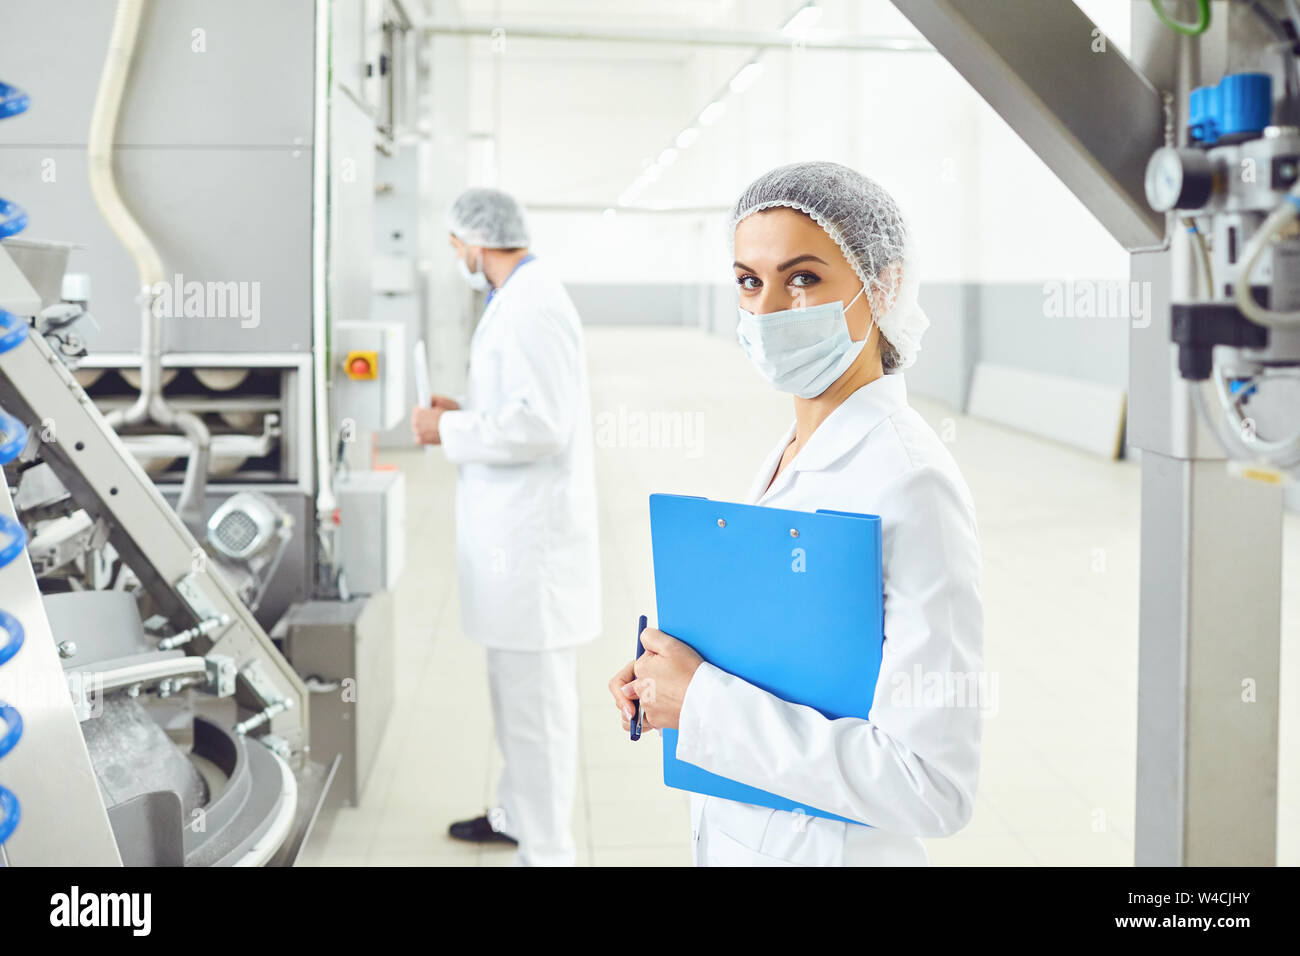 A woman in a white uniform with a folder in her hand controls the production process. Stock Photo